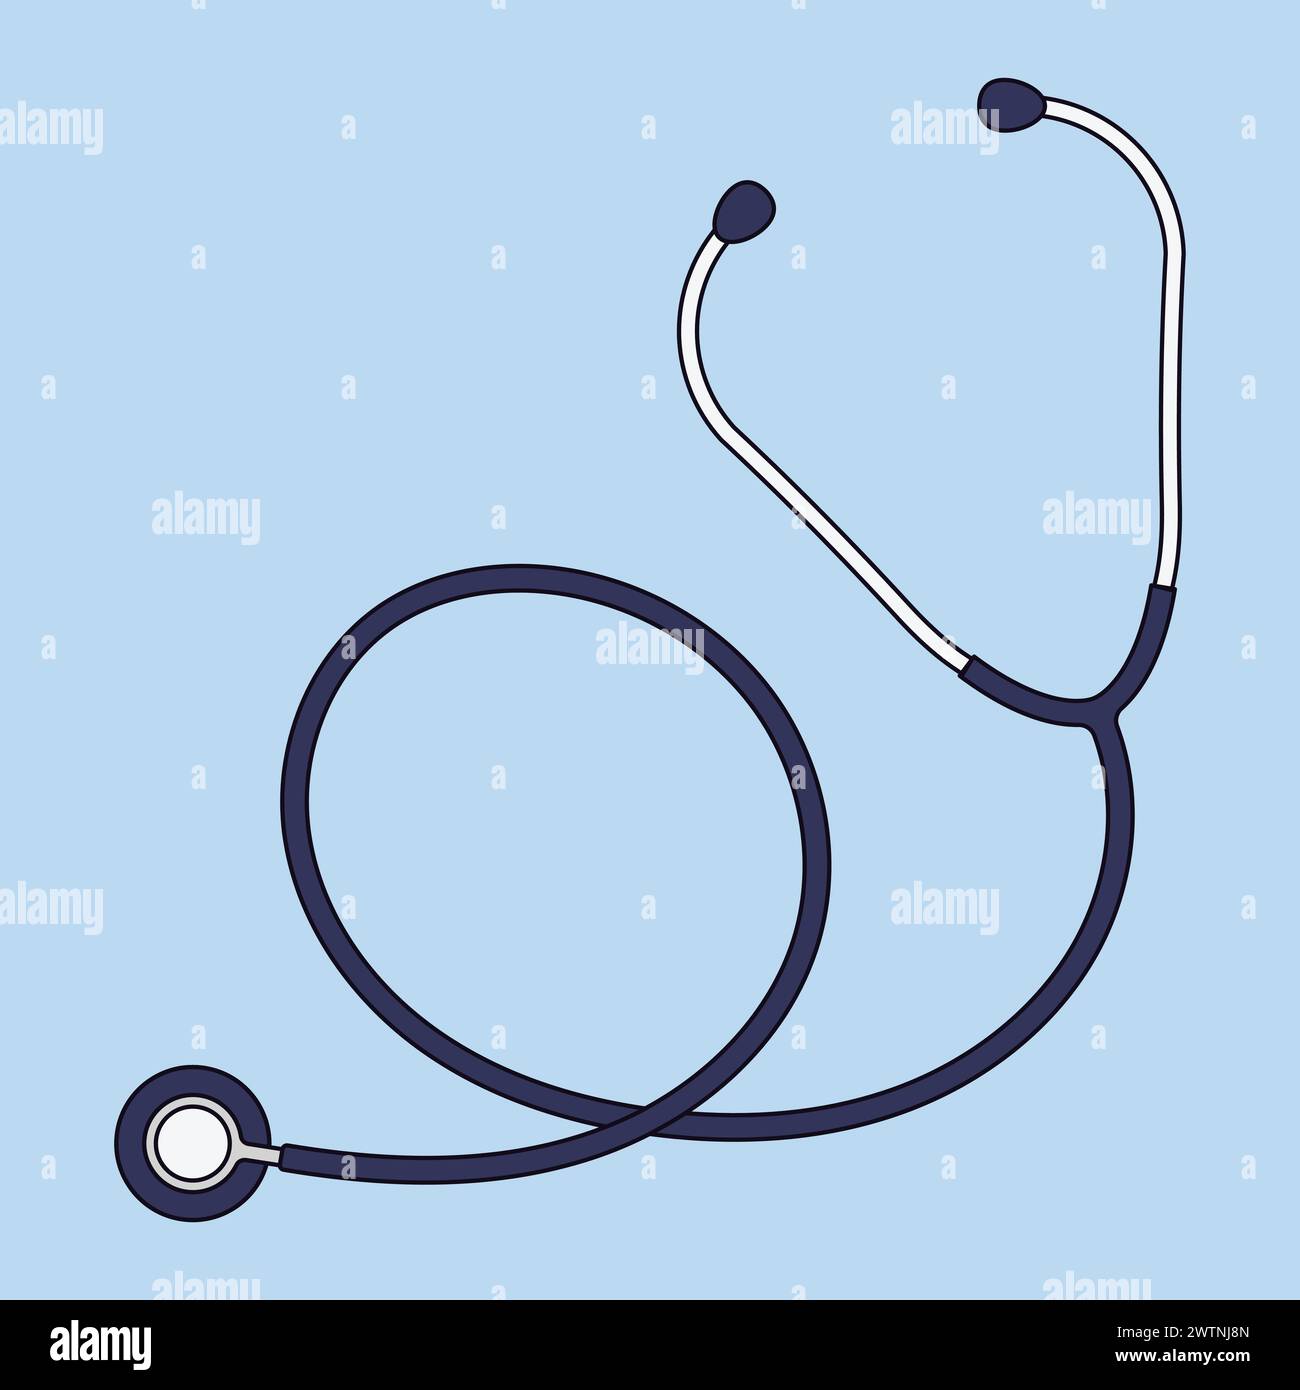 Stethoscope Vector Illustration Doctor Stethoscope Icon Medical Stethoscope Illustration Health Care Produce Stock Vector